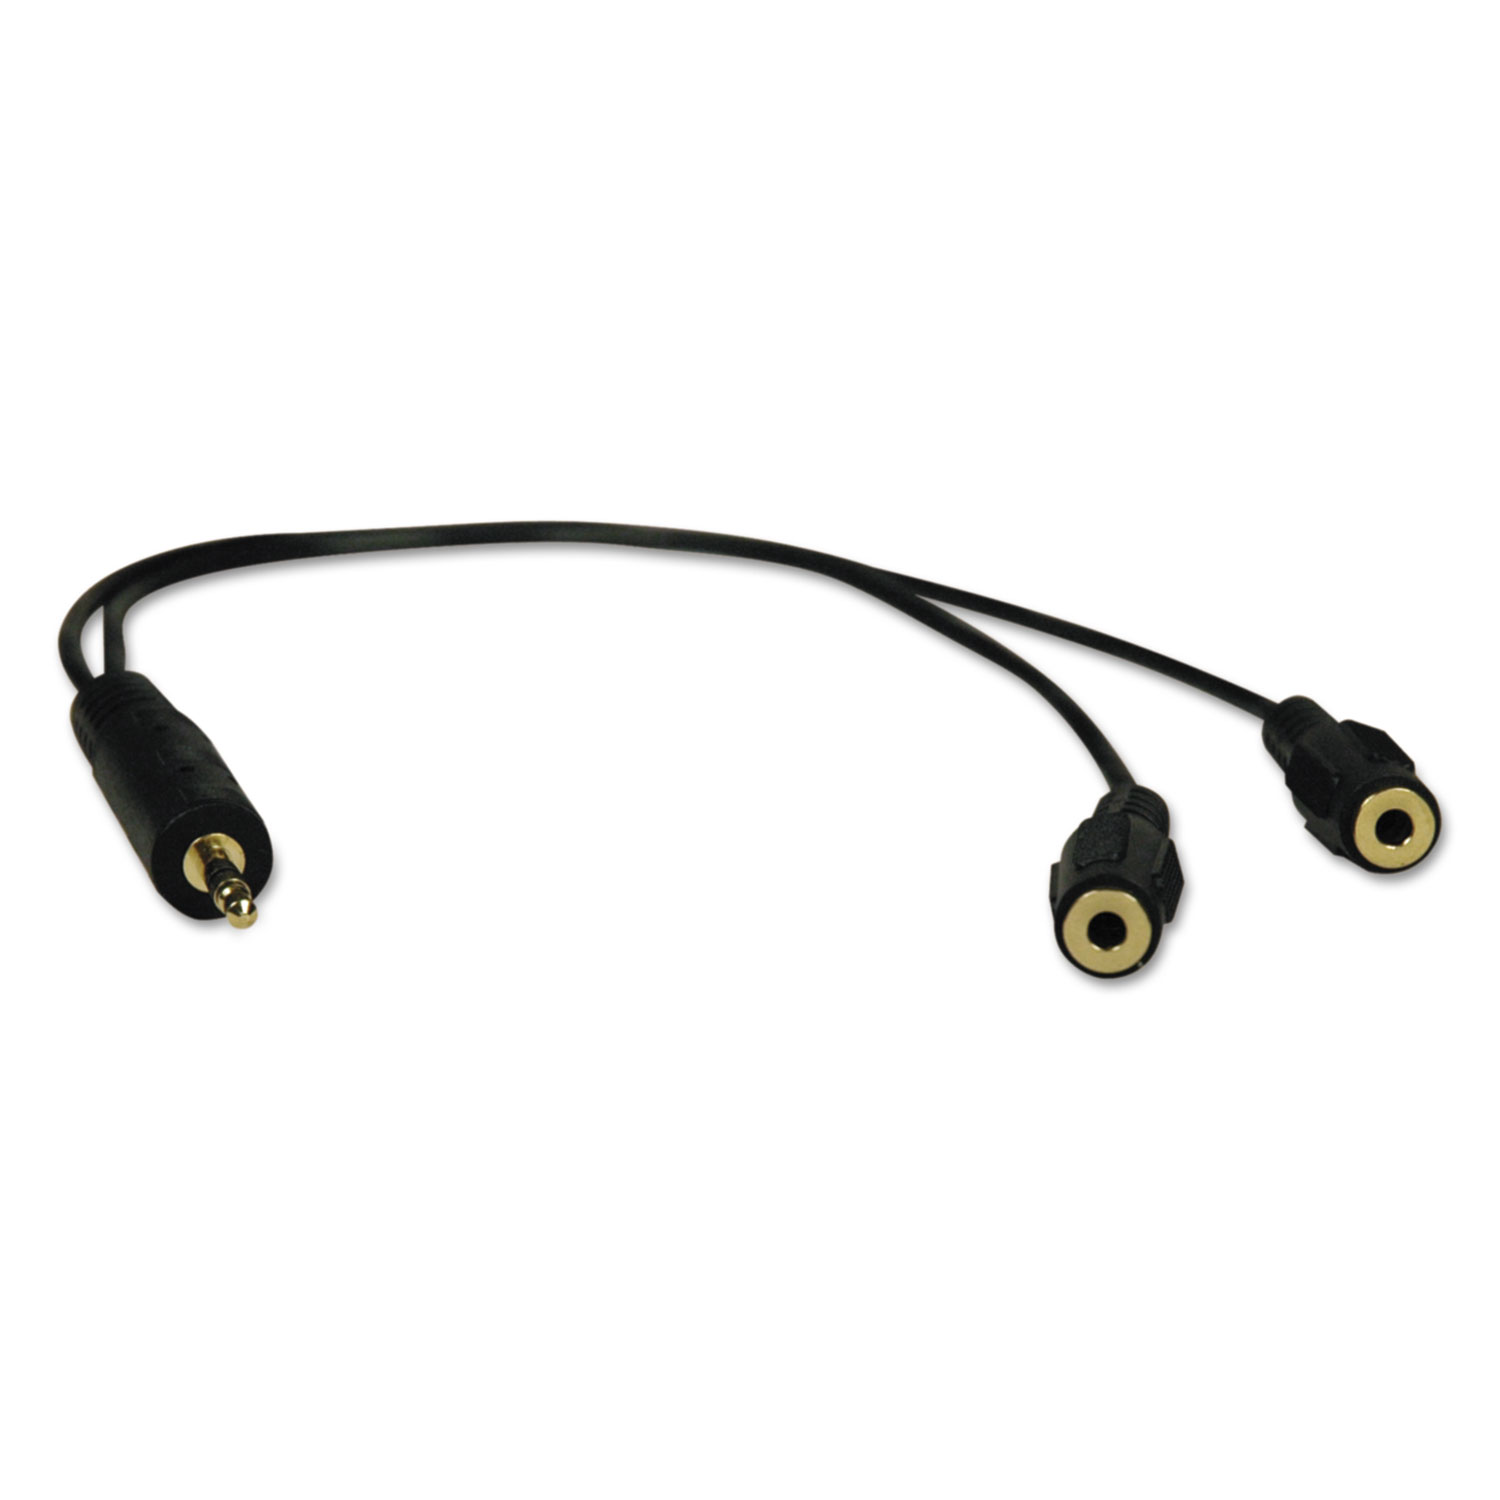 Audio Cables, 1 ft, Black, 3.5 mm Male; Two 3.5 mm Female